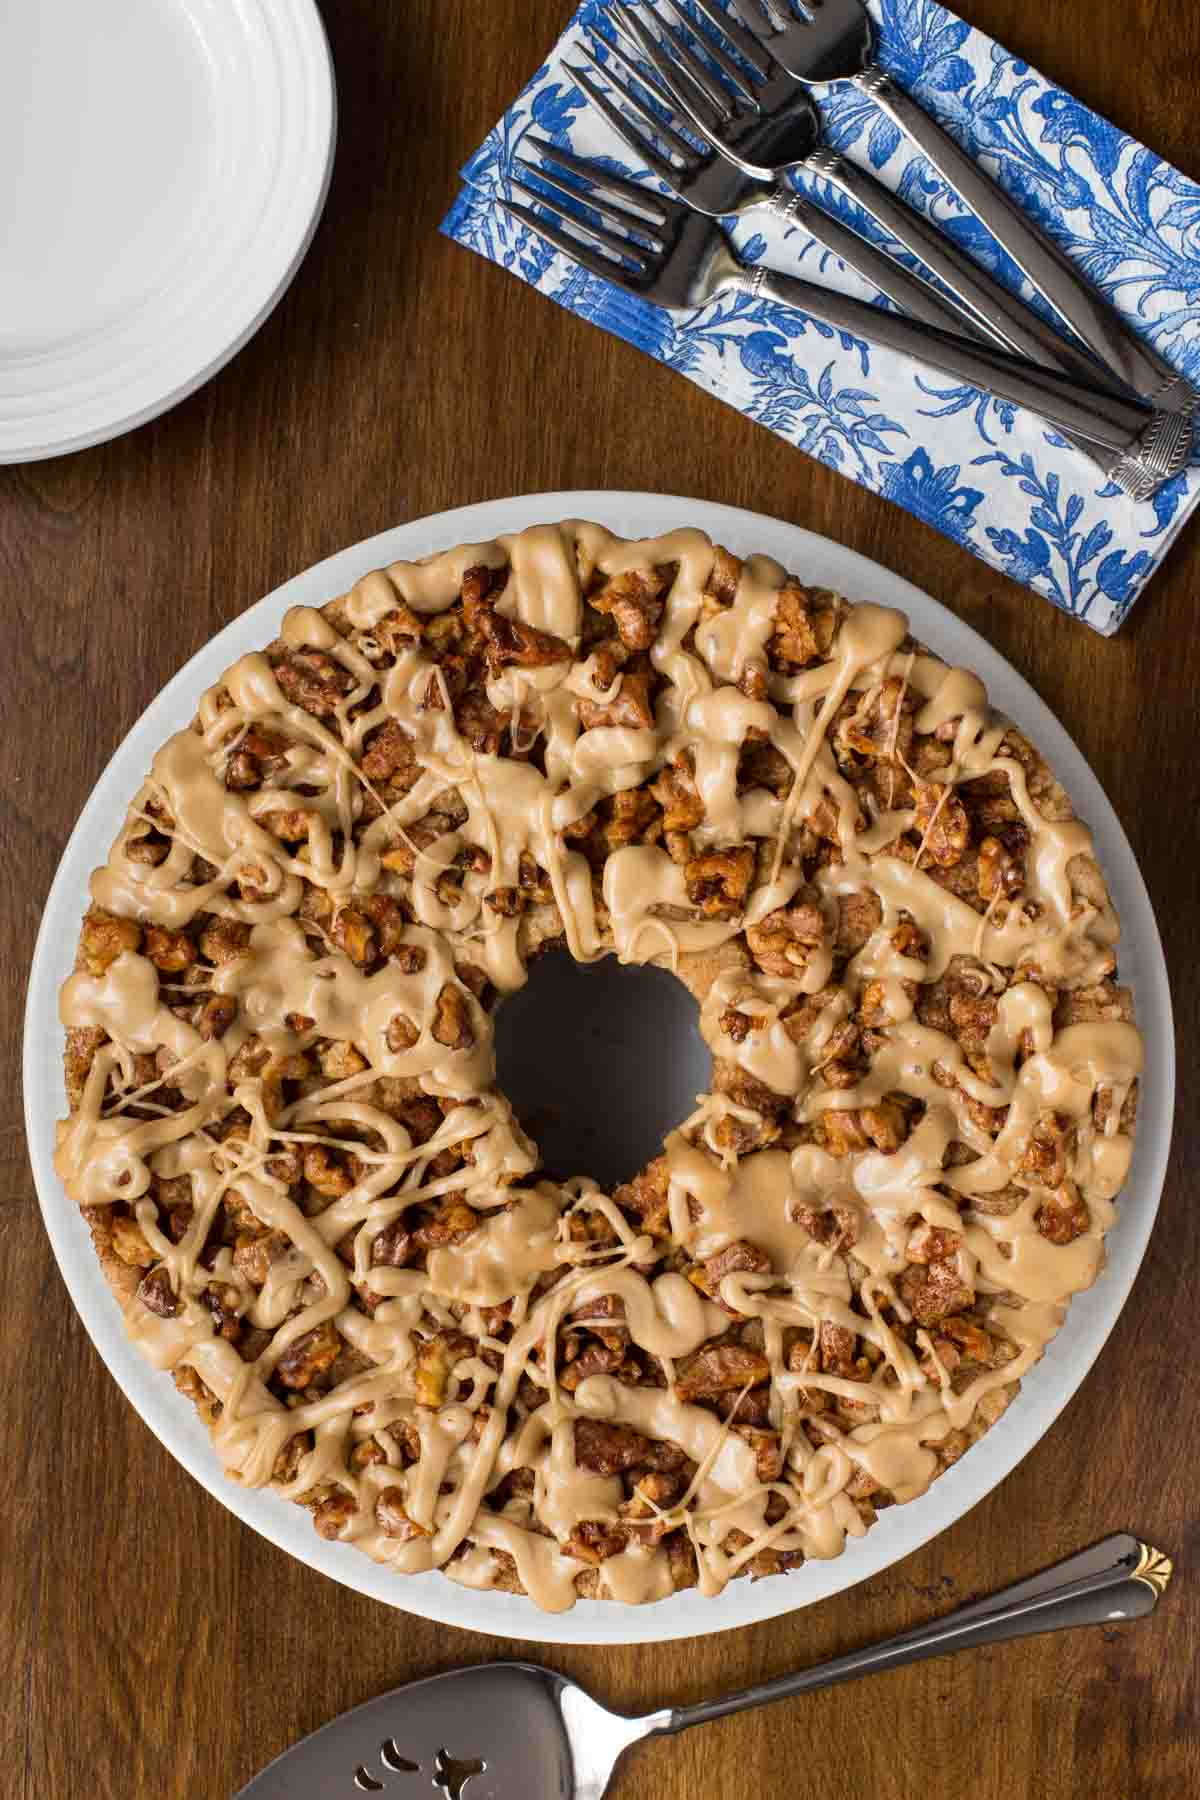 Overhead vertical photo of a Maple Walnut Banana Coffee Cake on a white plate with blue and white patterned napkins.